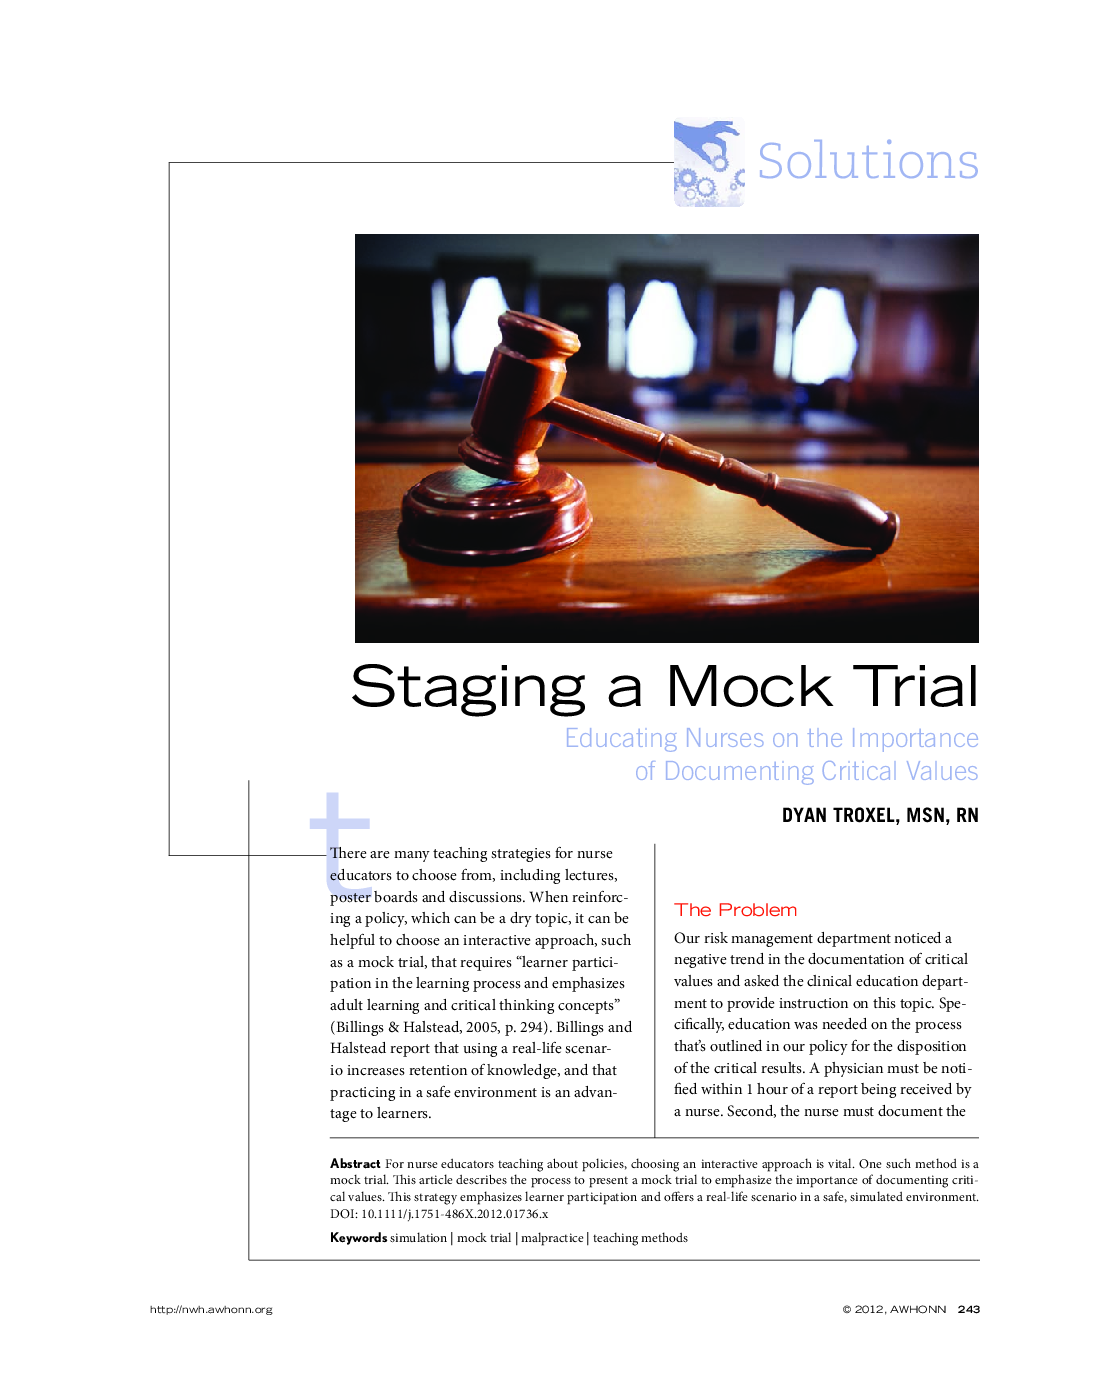 Staging a Mock Trial: Educating Nurses on the Importance of Documenting Critical Values